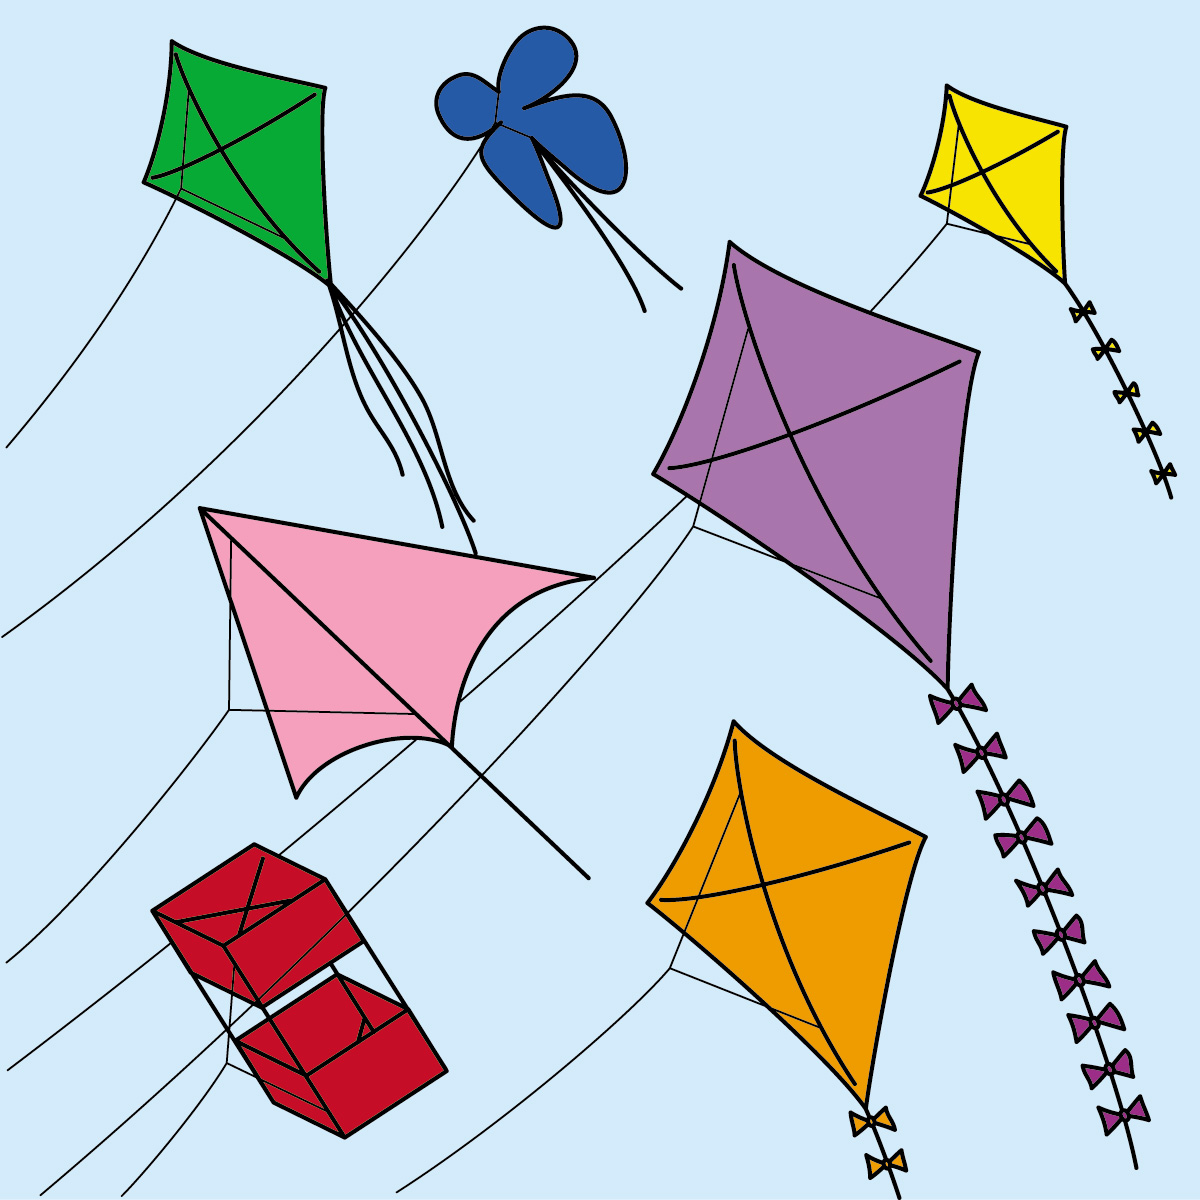 There Is 20 A Row Of Kites Free Cliparts All Used For Free